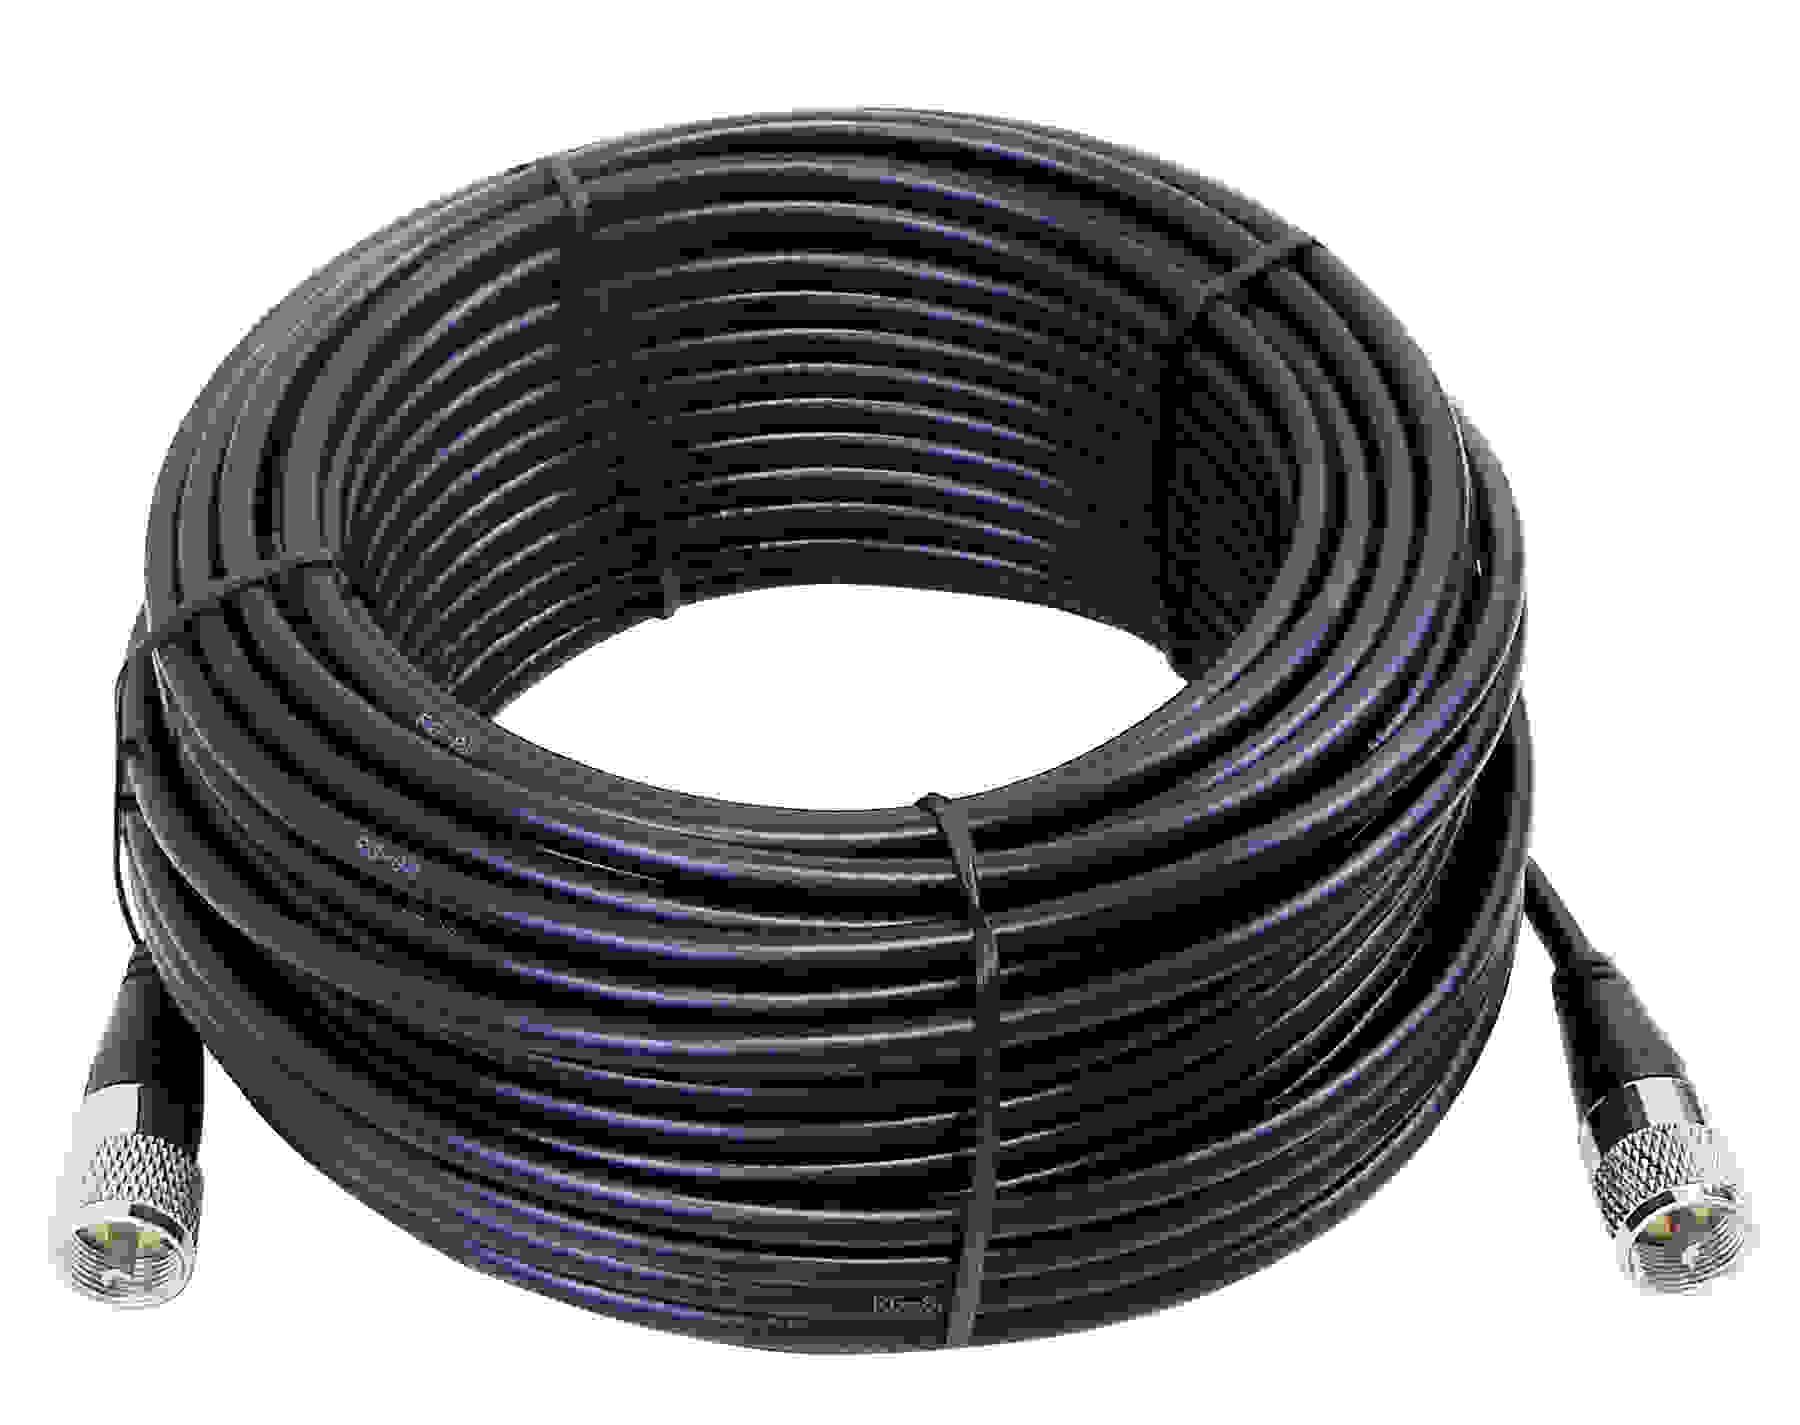 Kalibur 75 Foot Black Rg8X Coax Cable Assembly With Molded Pl259 Connectors On Each End